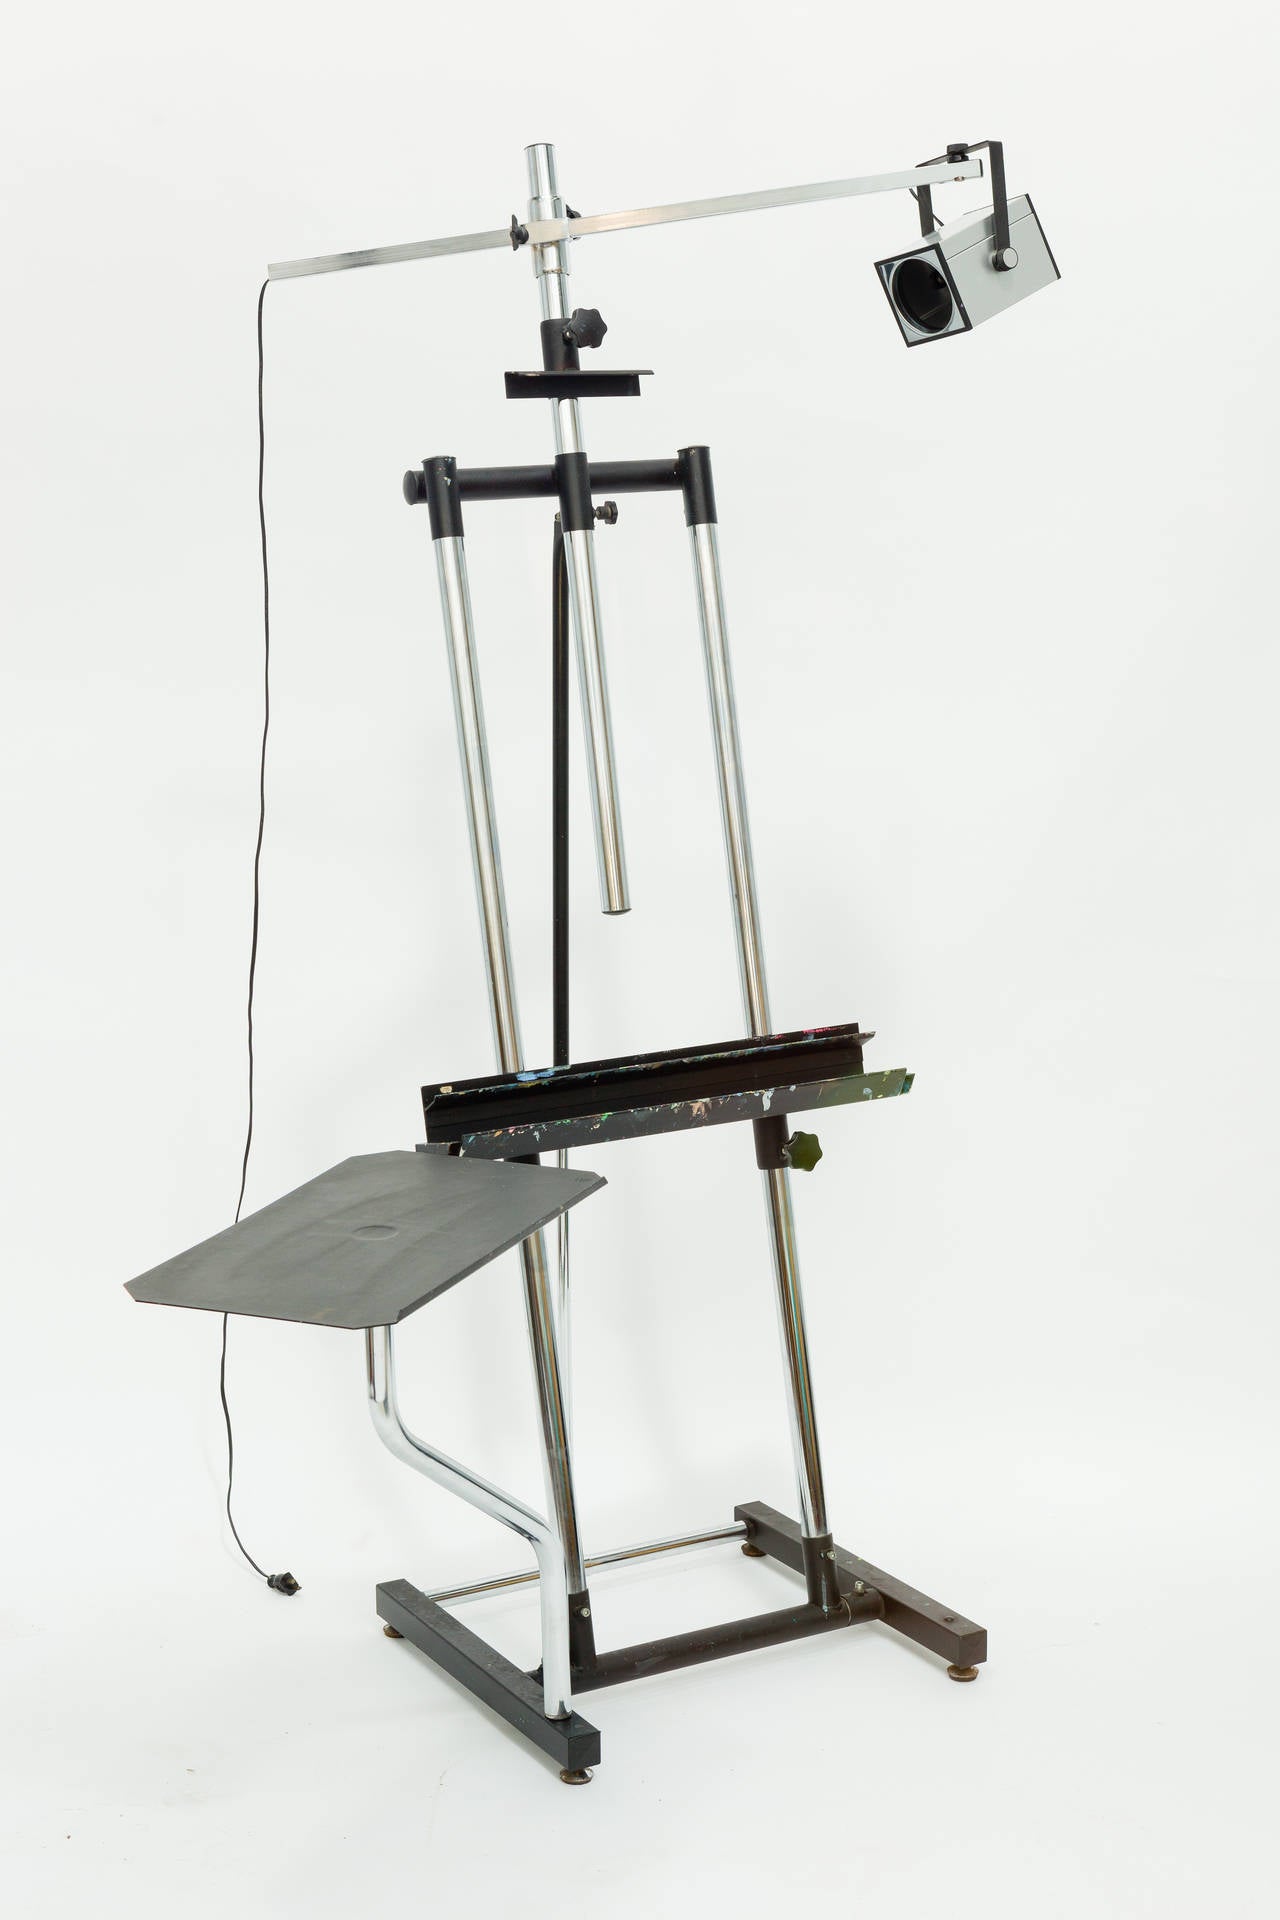 Mid century artist easel with a overhead lamp. Made in Italy in the 1970's. The easel is fully adjustable.